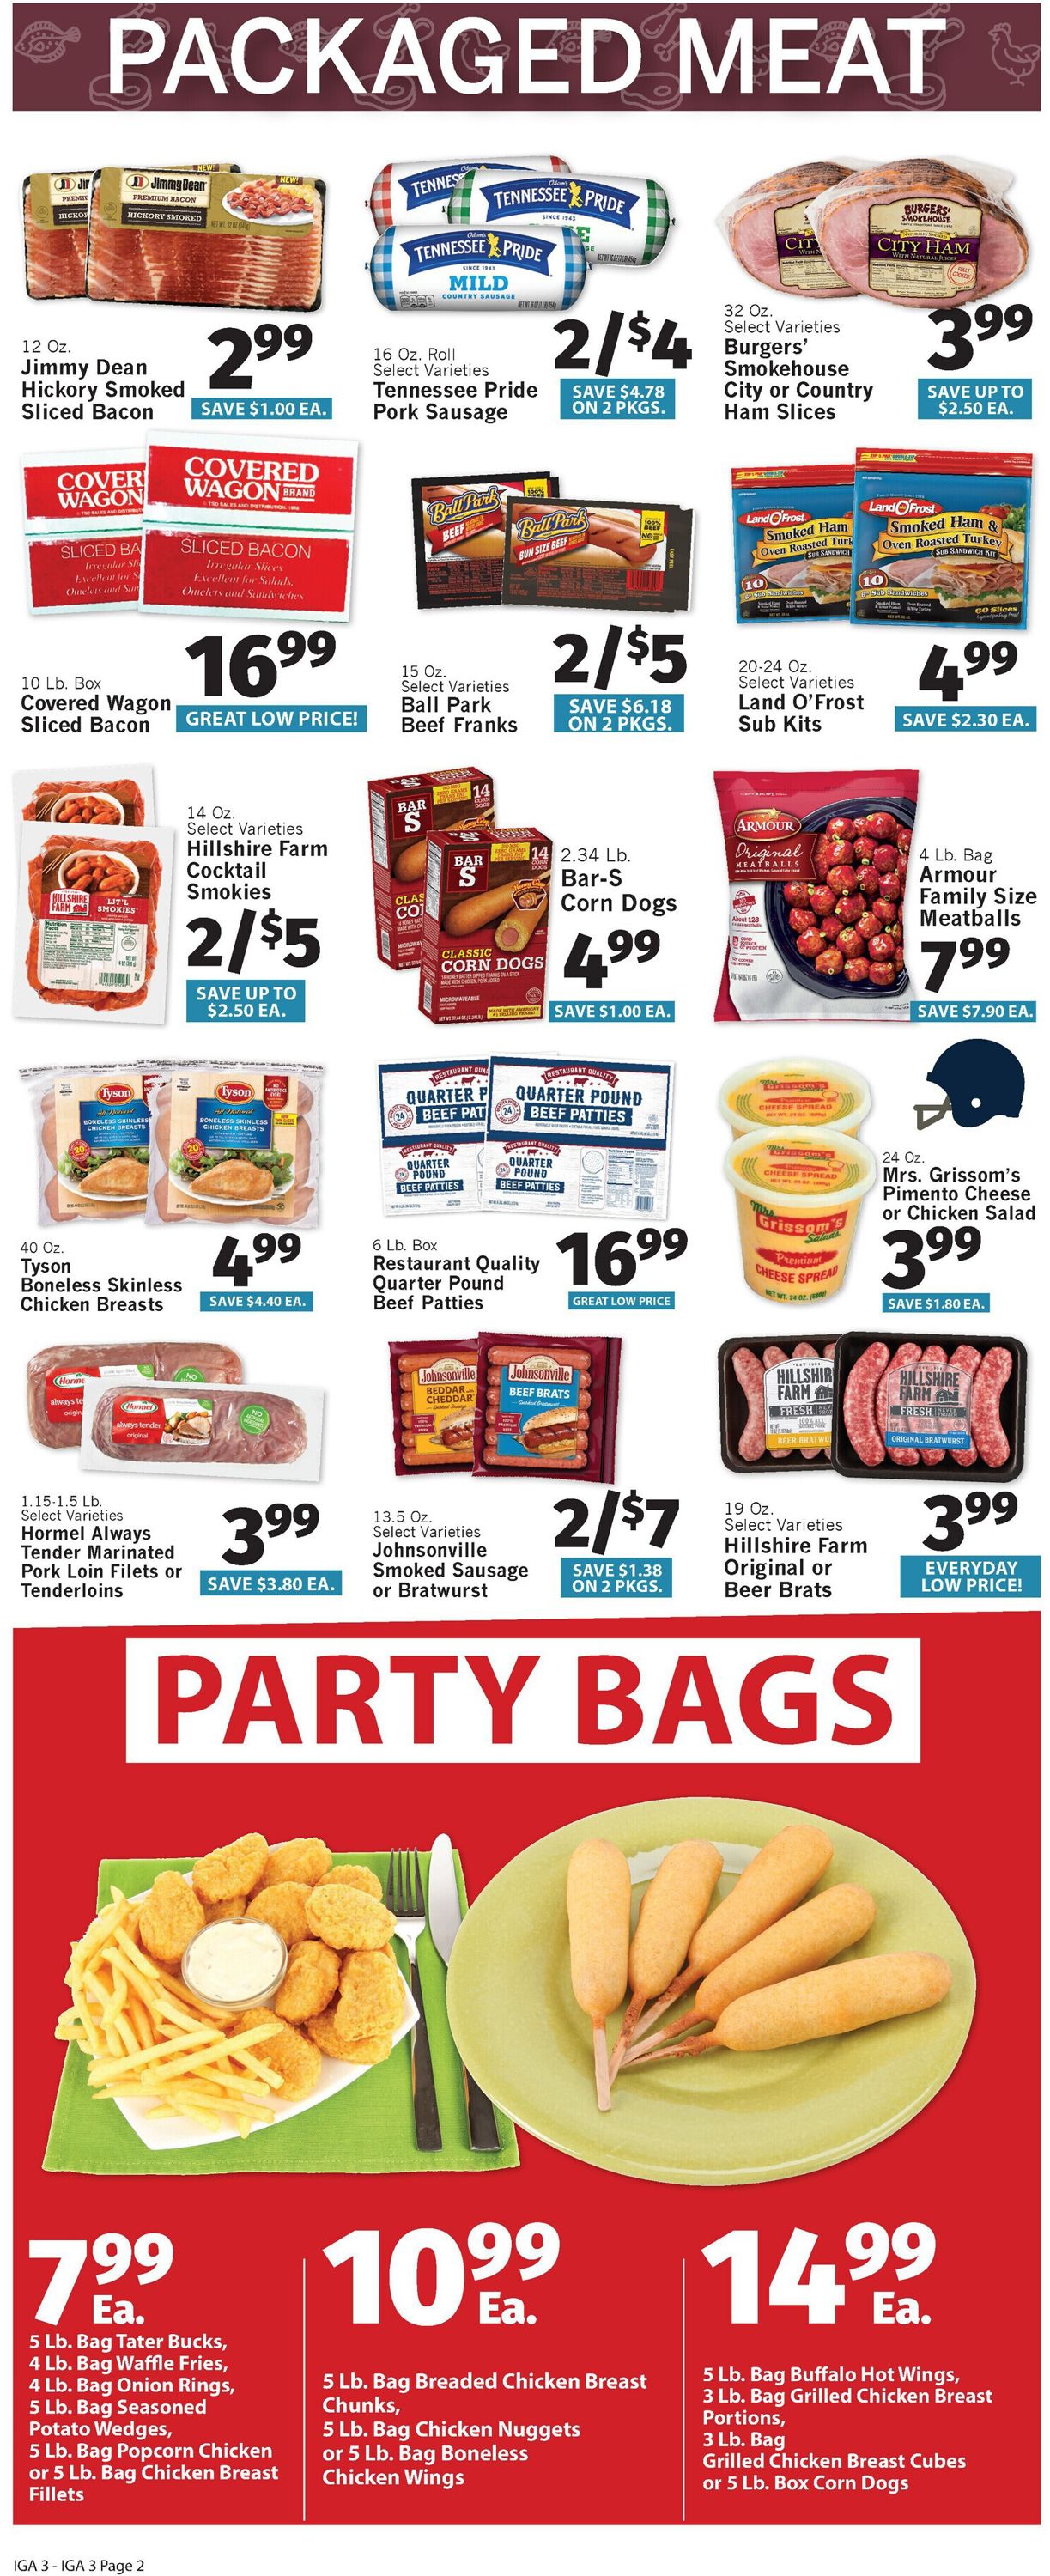 IGA Ad from 02/03/2021